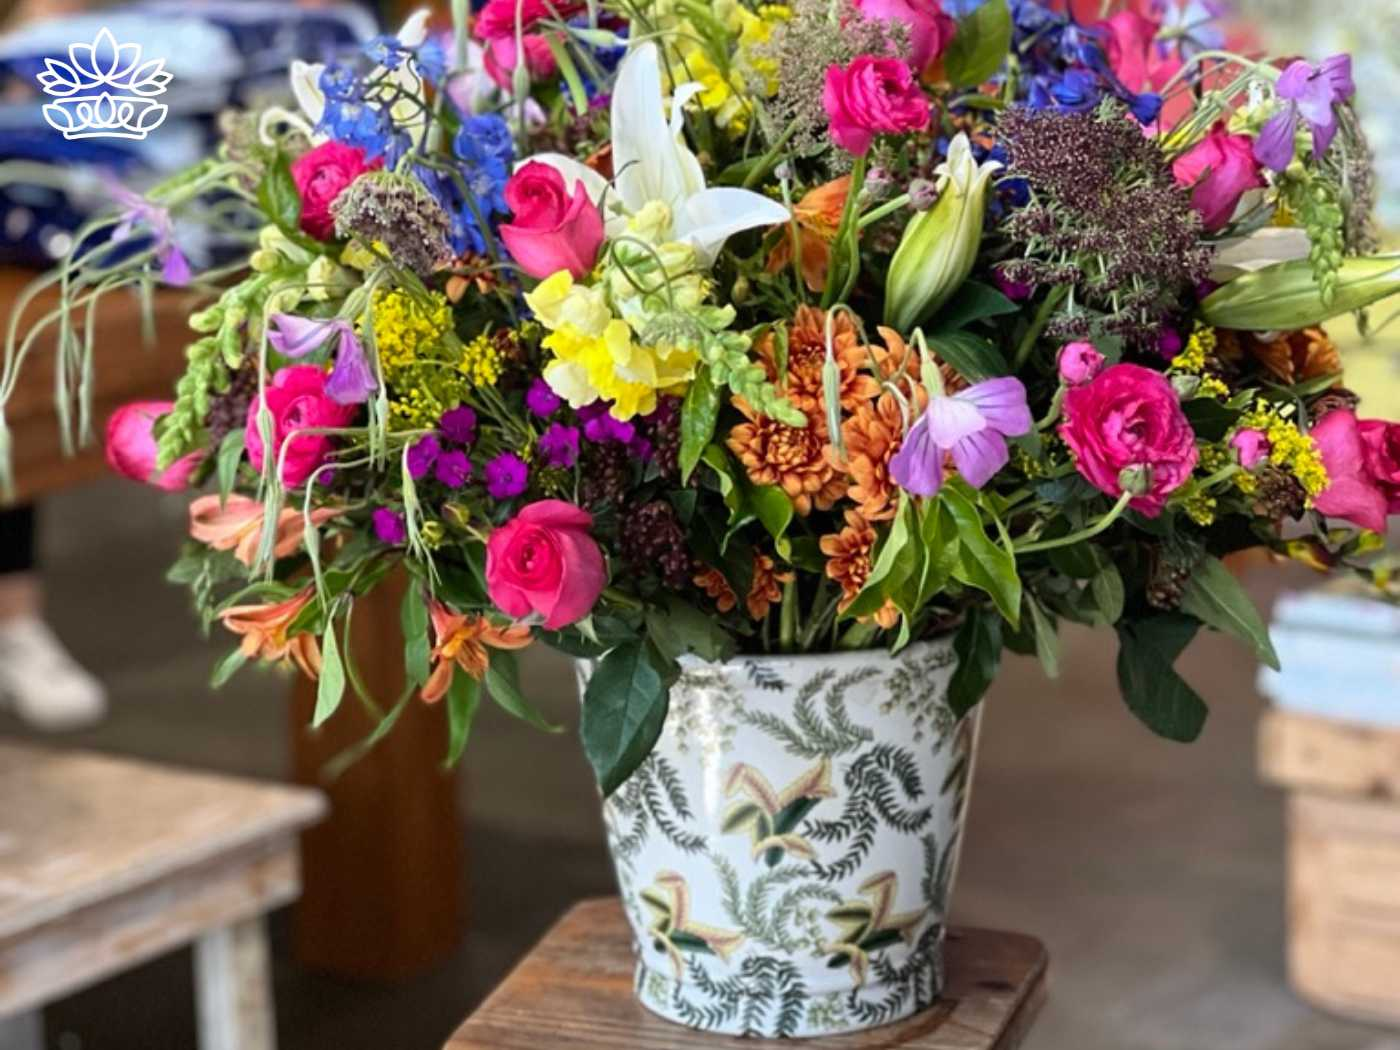 Elegant flower arrangement from the Flowers By Type Collection at Fabulous Flowers and Gifts, featuring a vibrant mix of roses, lilies, and other blooms.